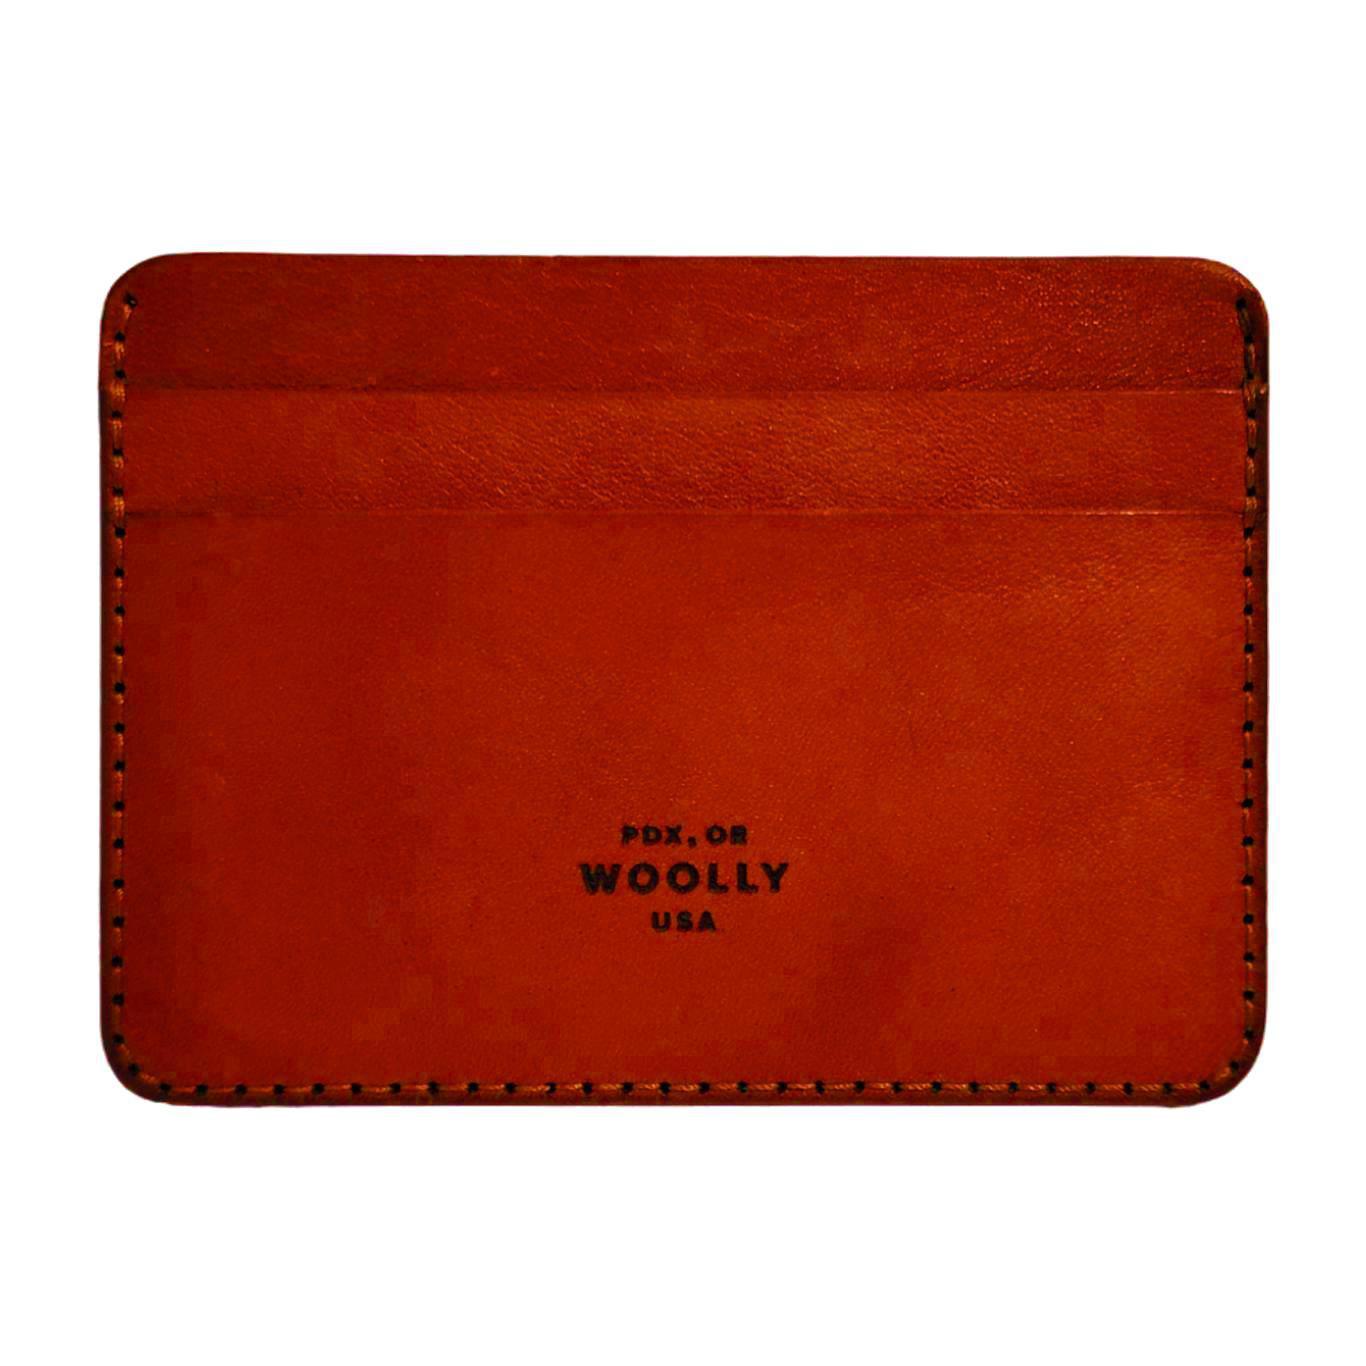 Woolly Made Leather Wallets Combine Modern and Traditional Techniques